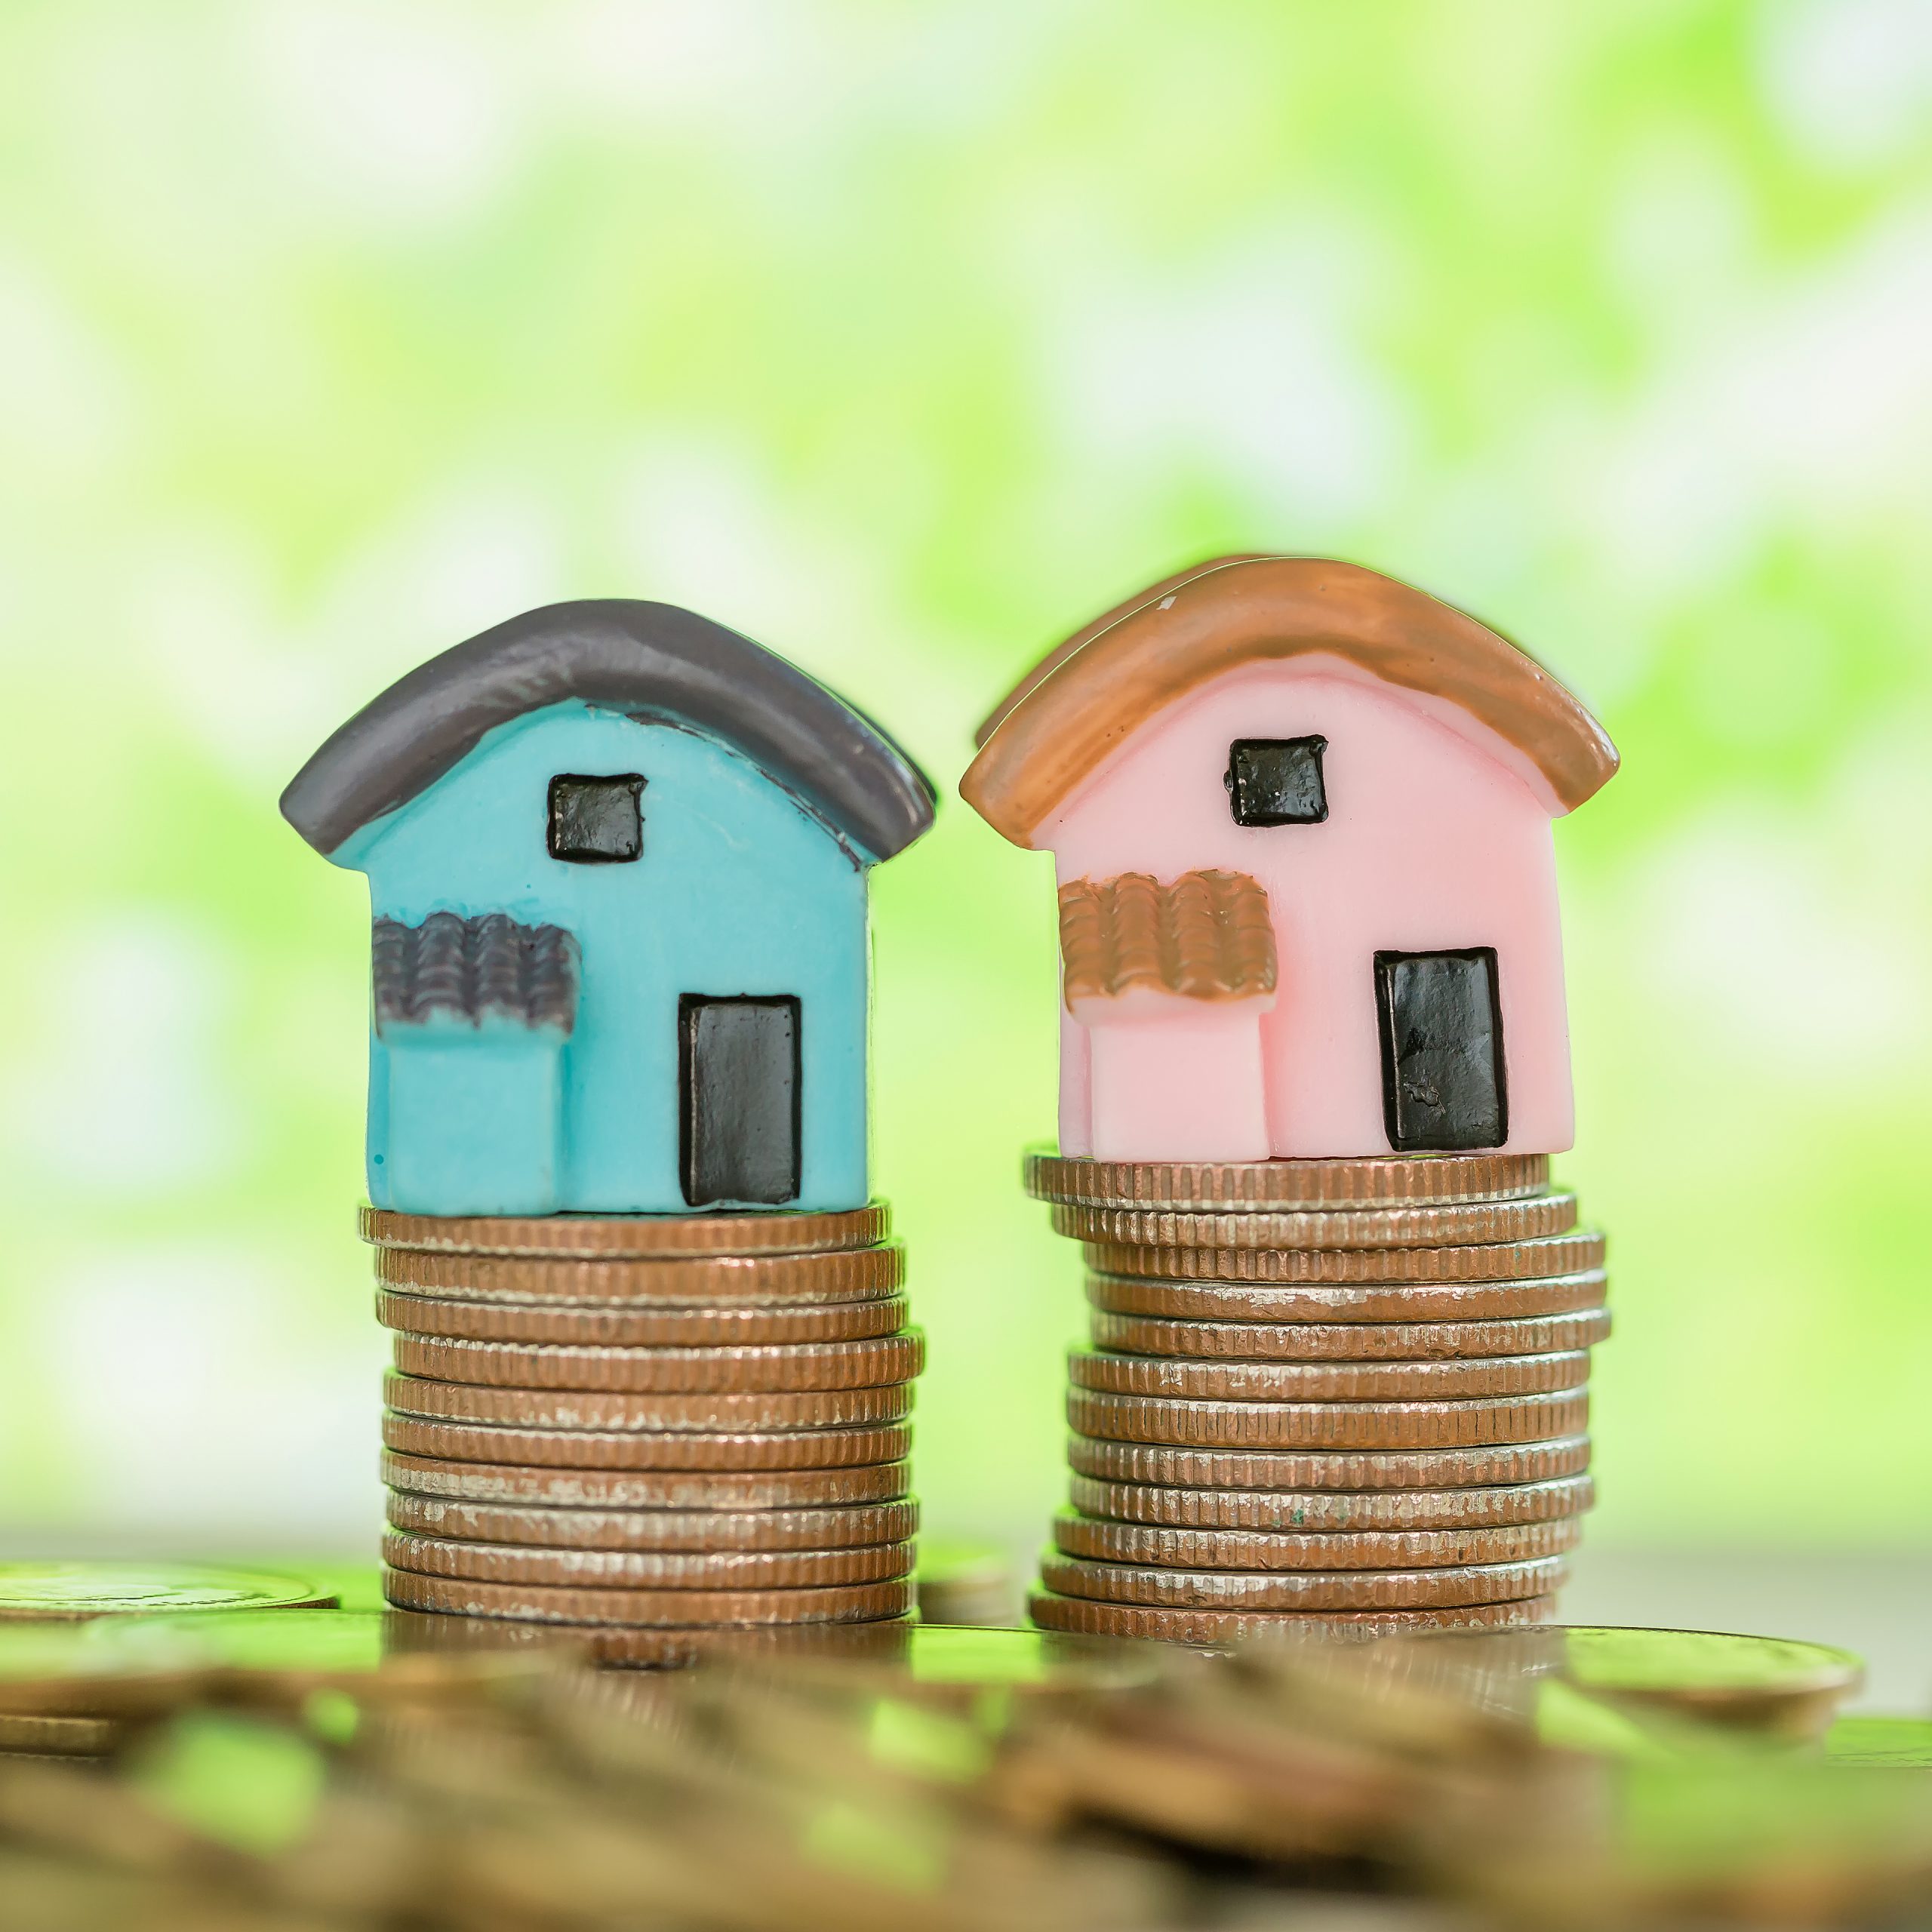 mini-house-stack-coins-with-green-blur-scaled.jpg